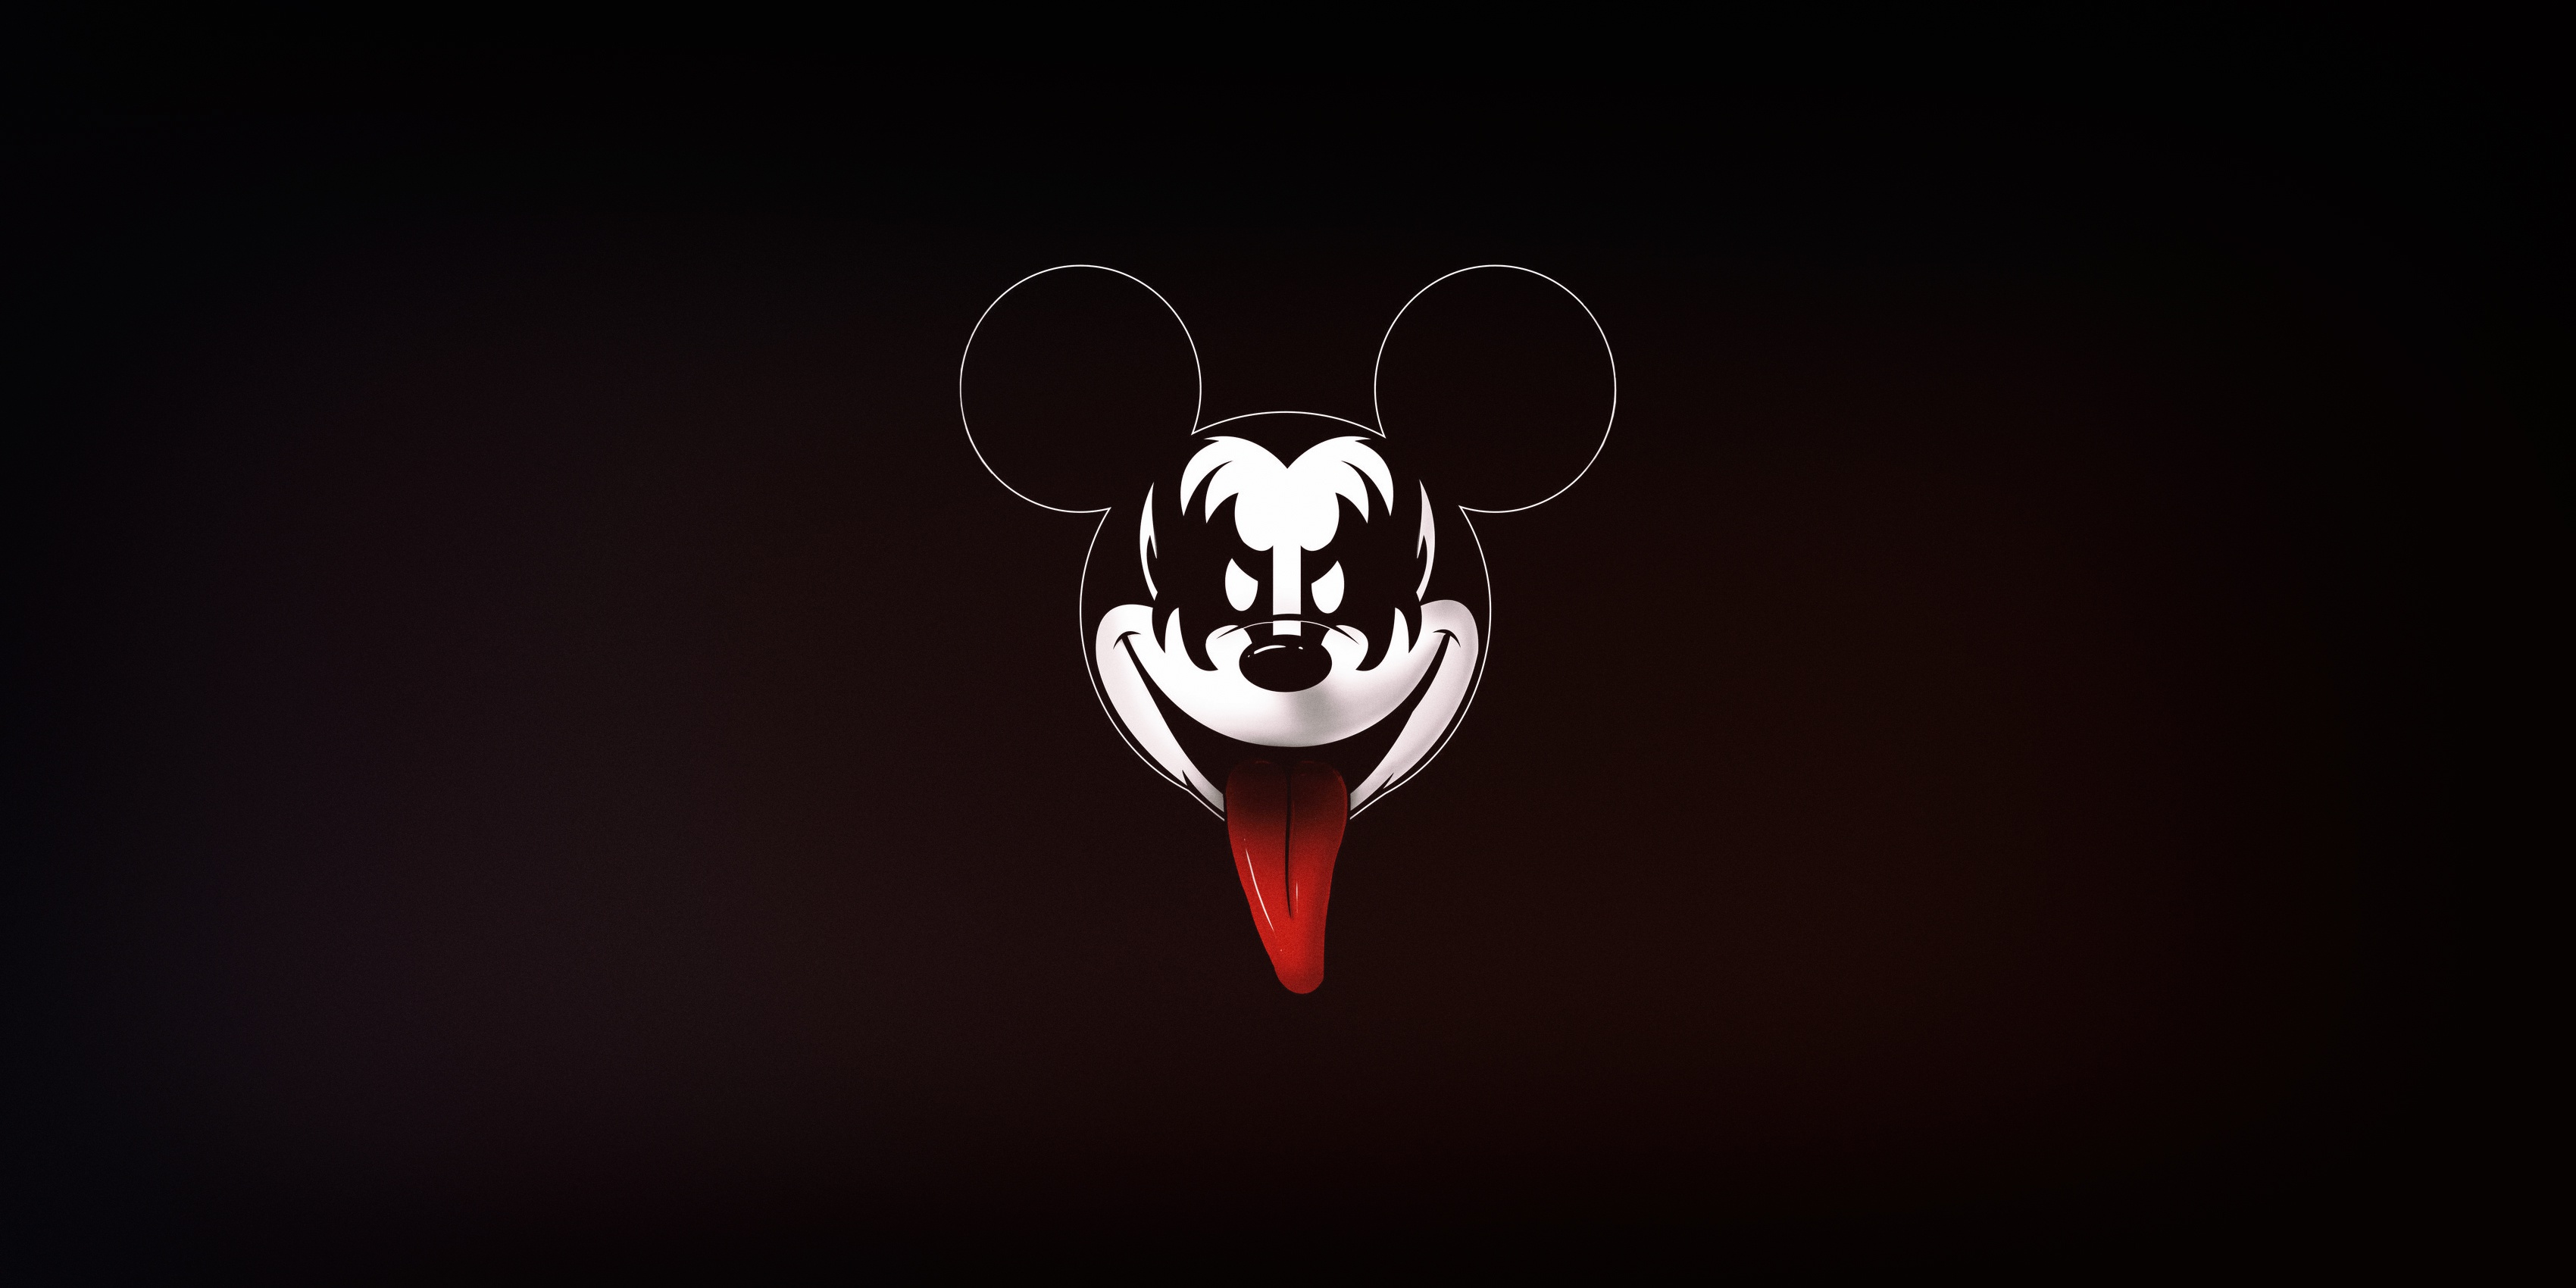 Download wallpaper Minimalism, Figure, Language, Style, Background, Face,  Art, Style, Rock, Mickey Mouse, Mickey Mouse, Mickey, Disney, Illustration,  Heavy Metal, Cartoon, section minimalism in resolution 3400x1700